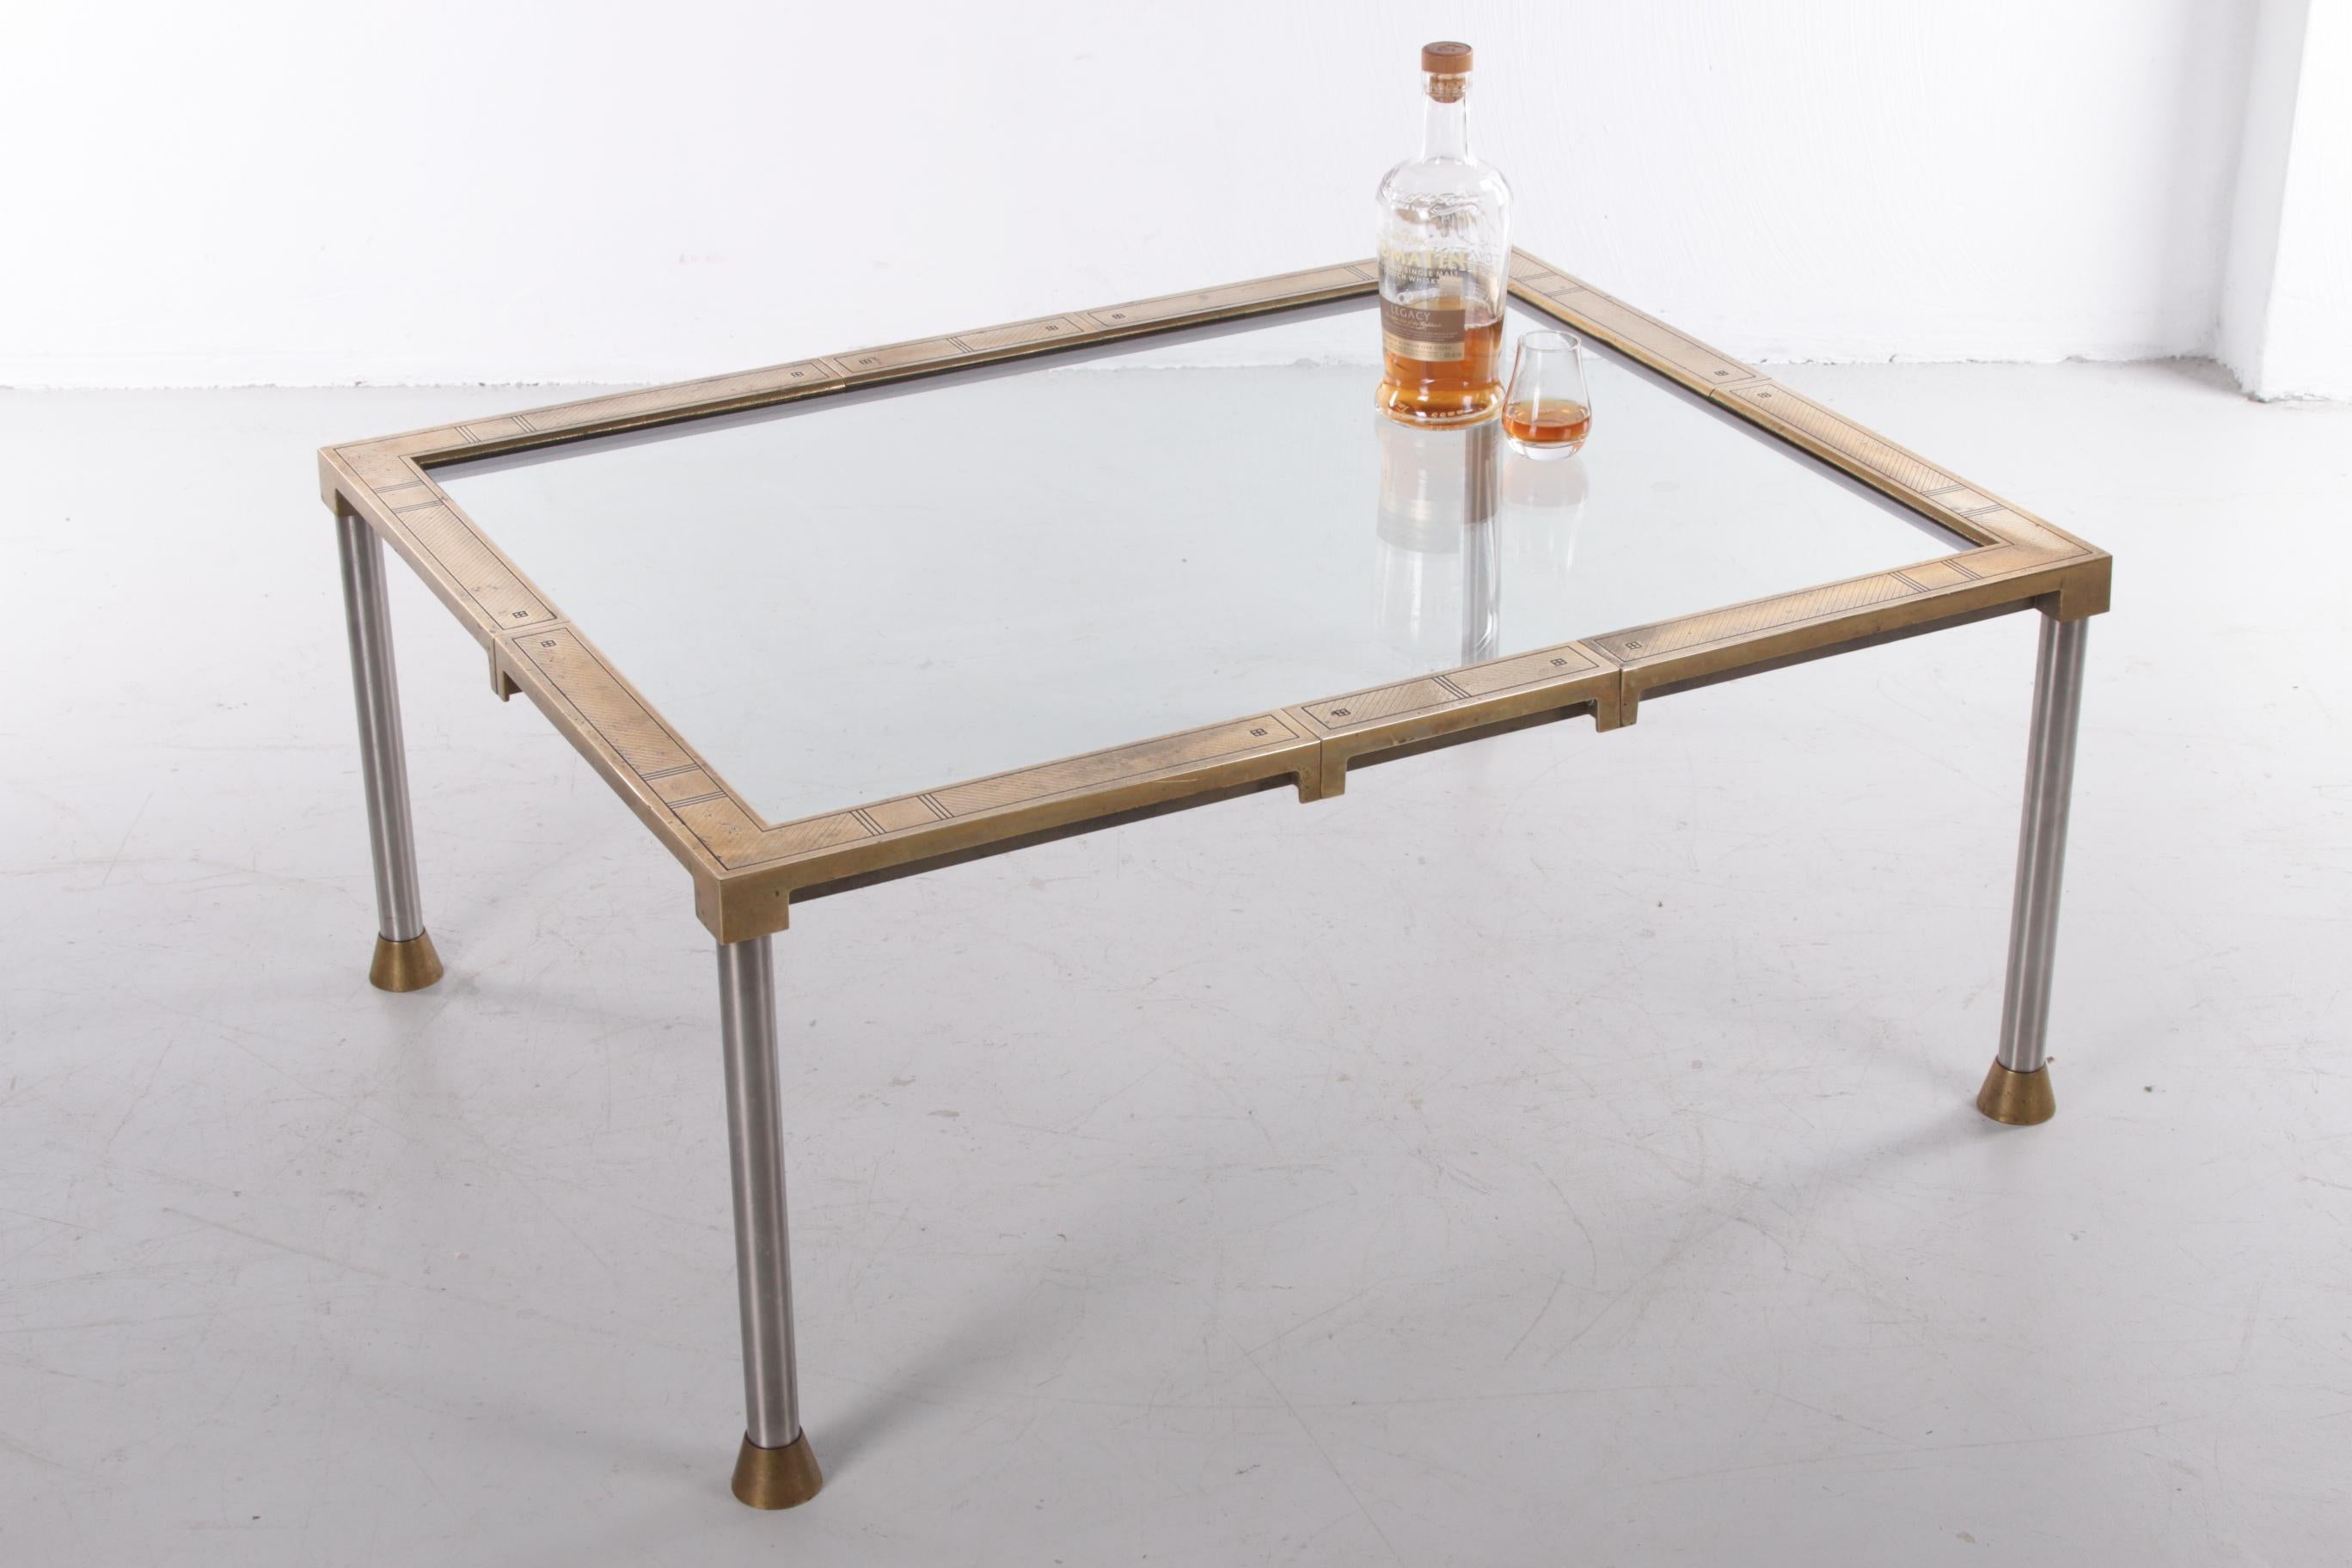 This is a very rare model coffee table, we contacted Peter Ghyczy, who told us that this table was issued once in 1970 for a large fair, the IMM in Cologne in the early 1970s.

At that time 10 tables were made and this is one of them. Therefore, if